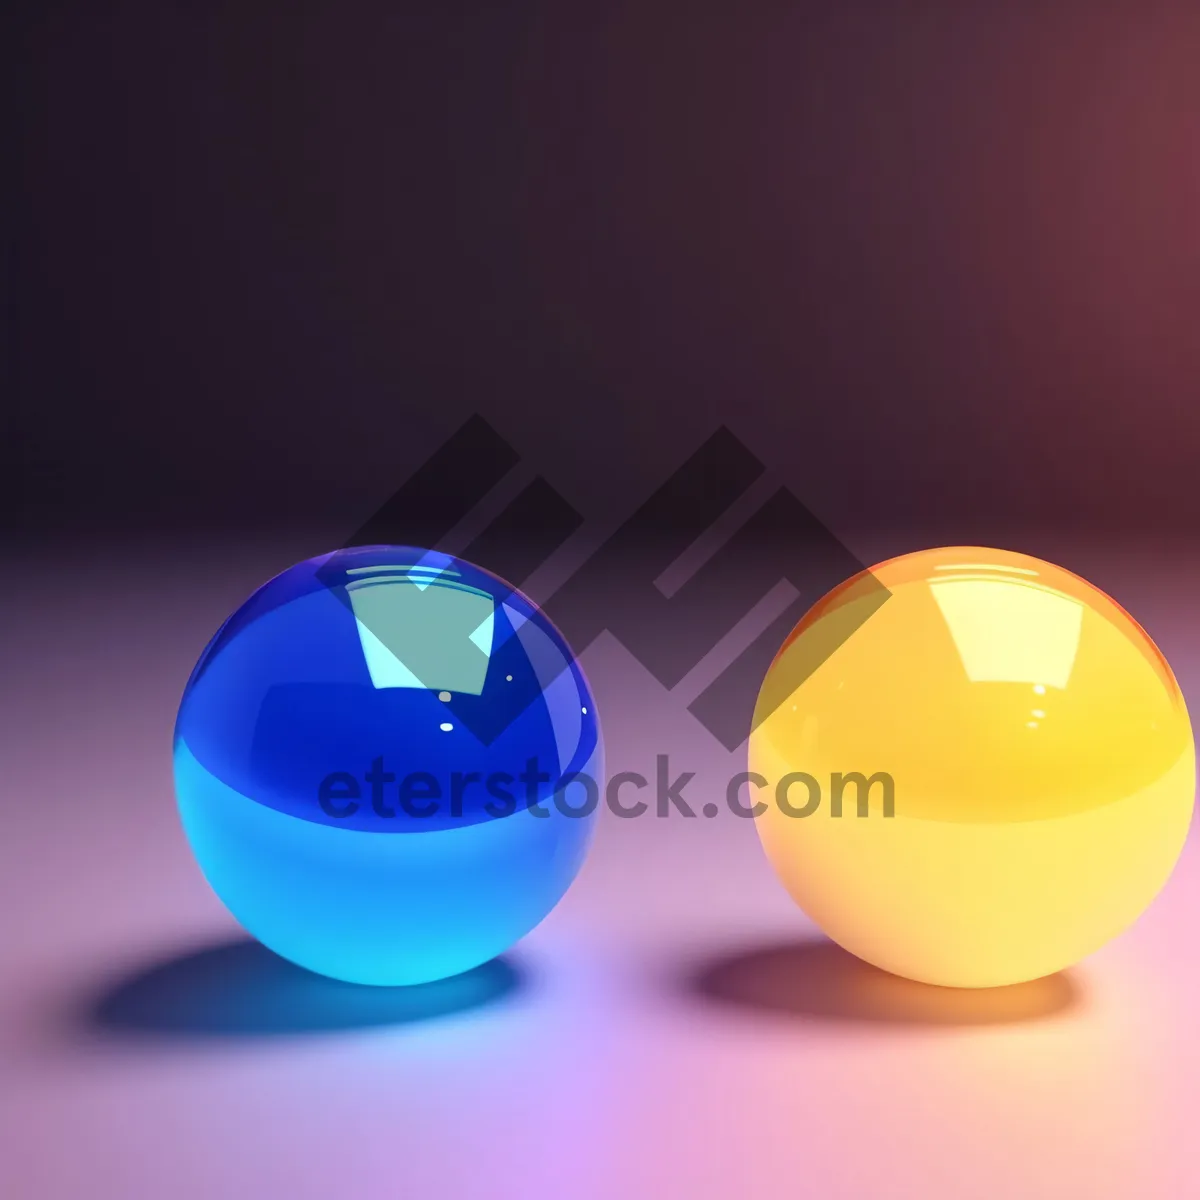 Picture of Colorful Button Collection with Shiny Glass Reflection